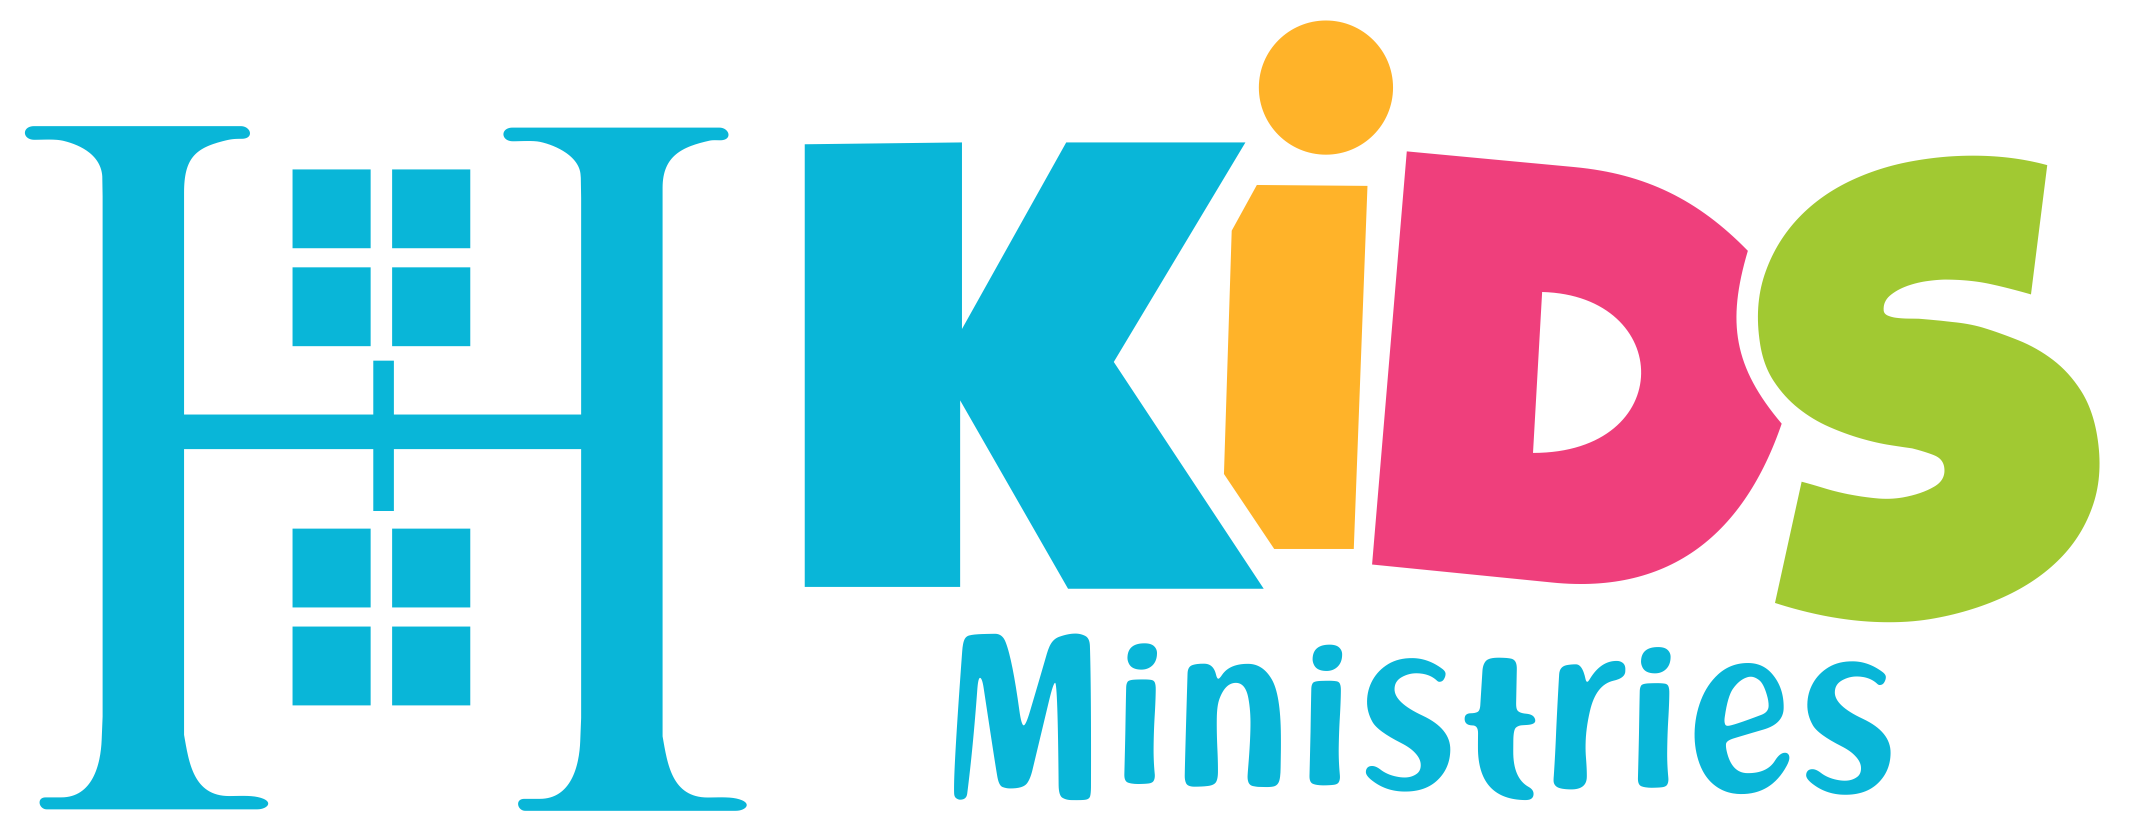 Hkids Ministry